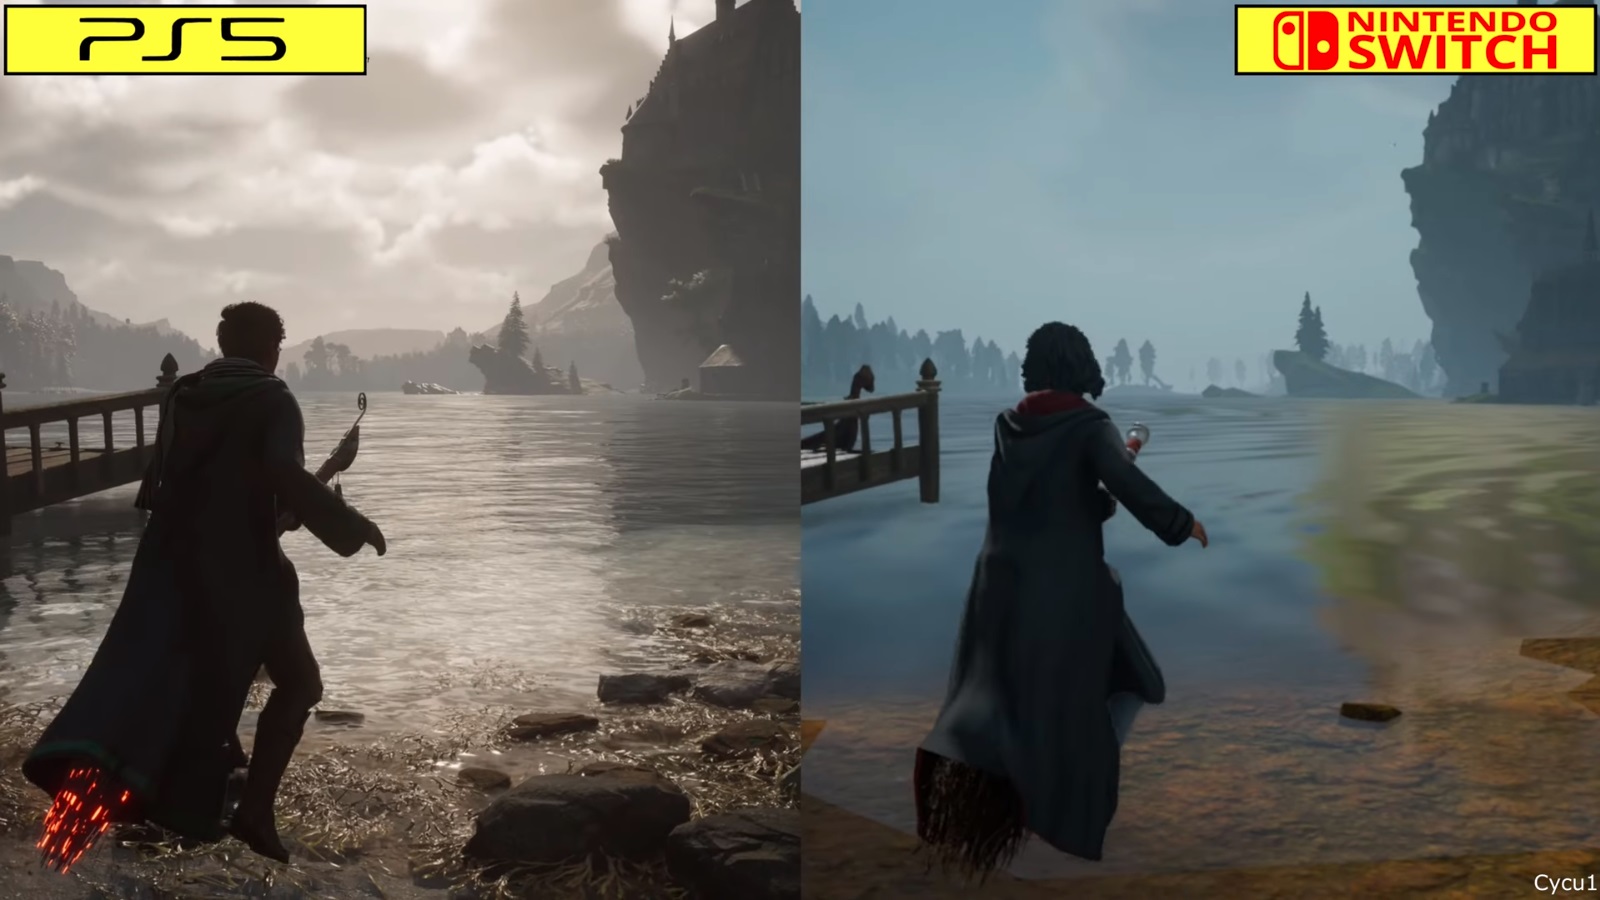 Comparison of Hogwarts Legacy on Nintendo Switch and PS5